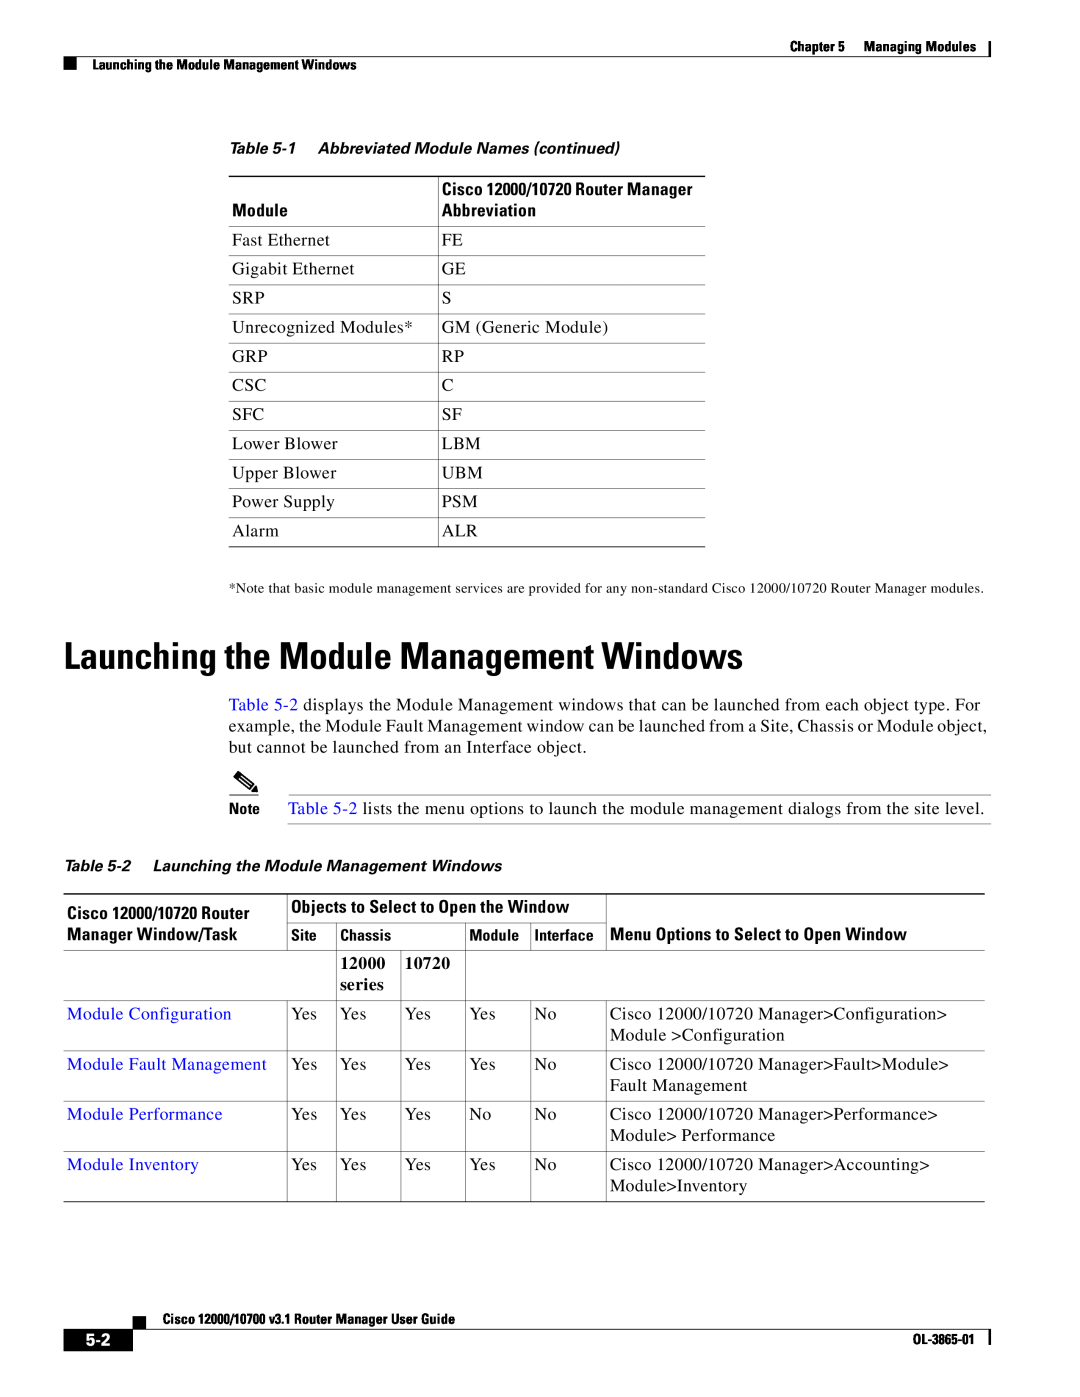 Cisco Systems 10700 Launching the Module Management Windows, Abbreviation, Cisco 12000/10720 Router, Manager Window/Task 